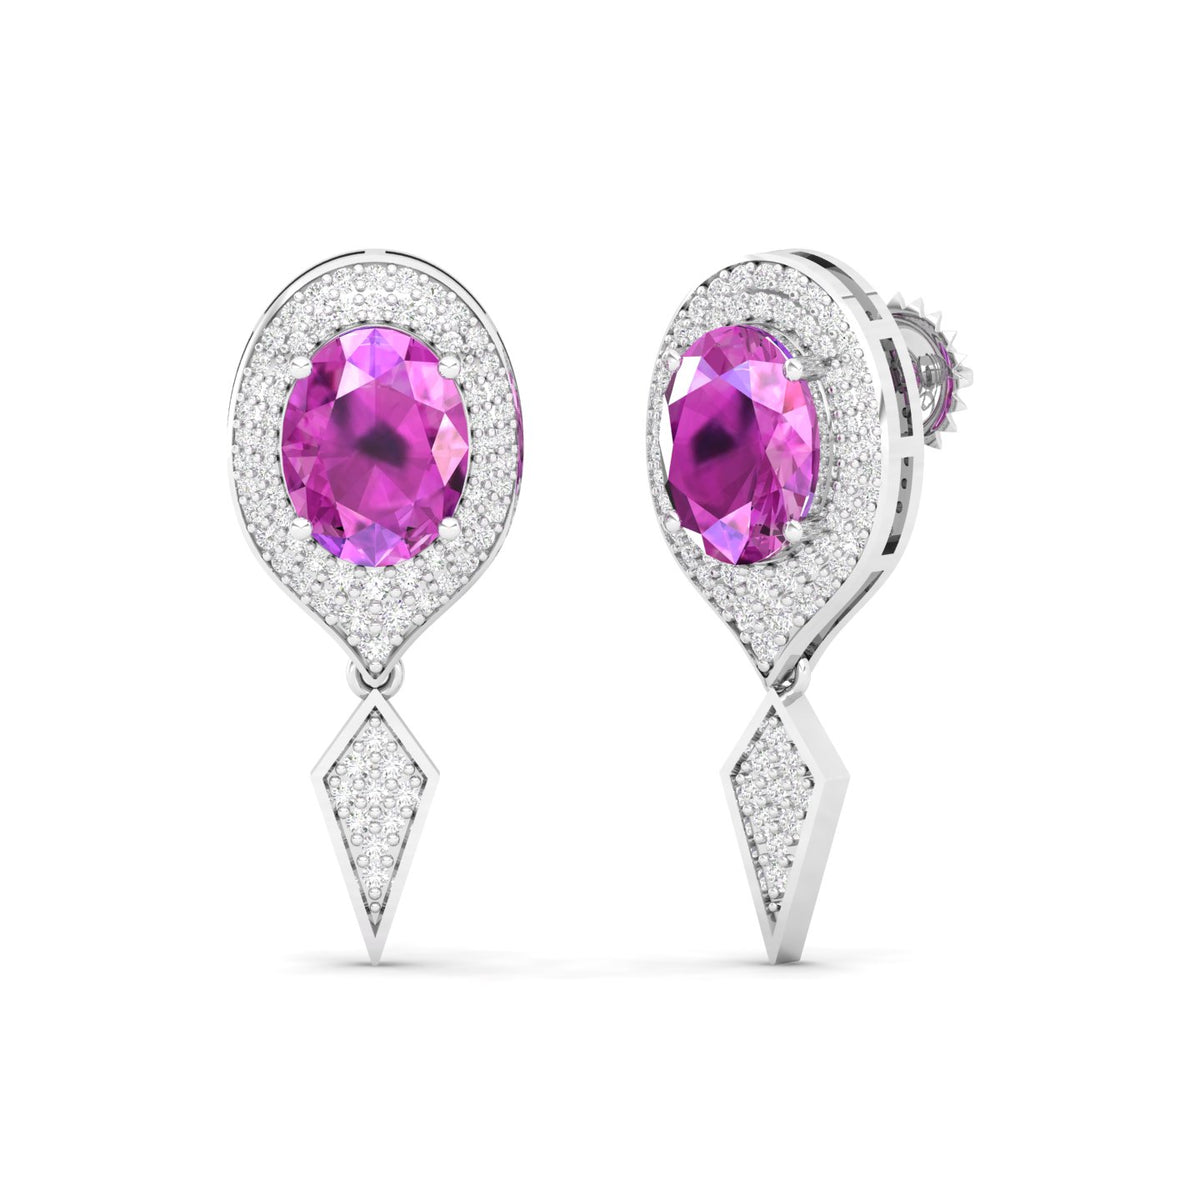 Maurya Pink Amethyst Quiescent Push Back Earrings with Diamonds